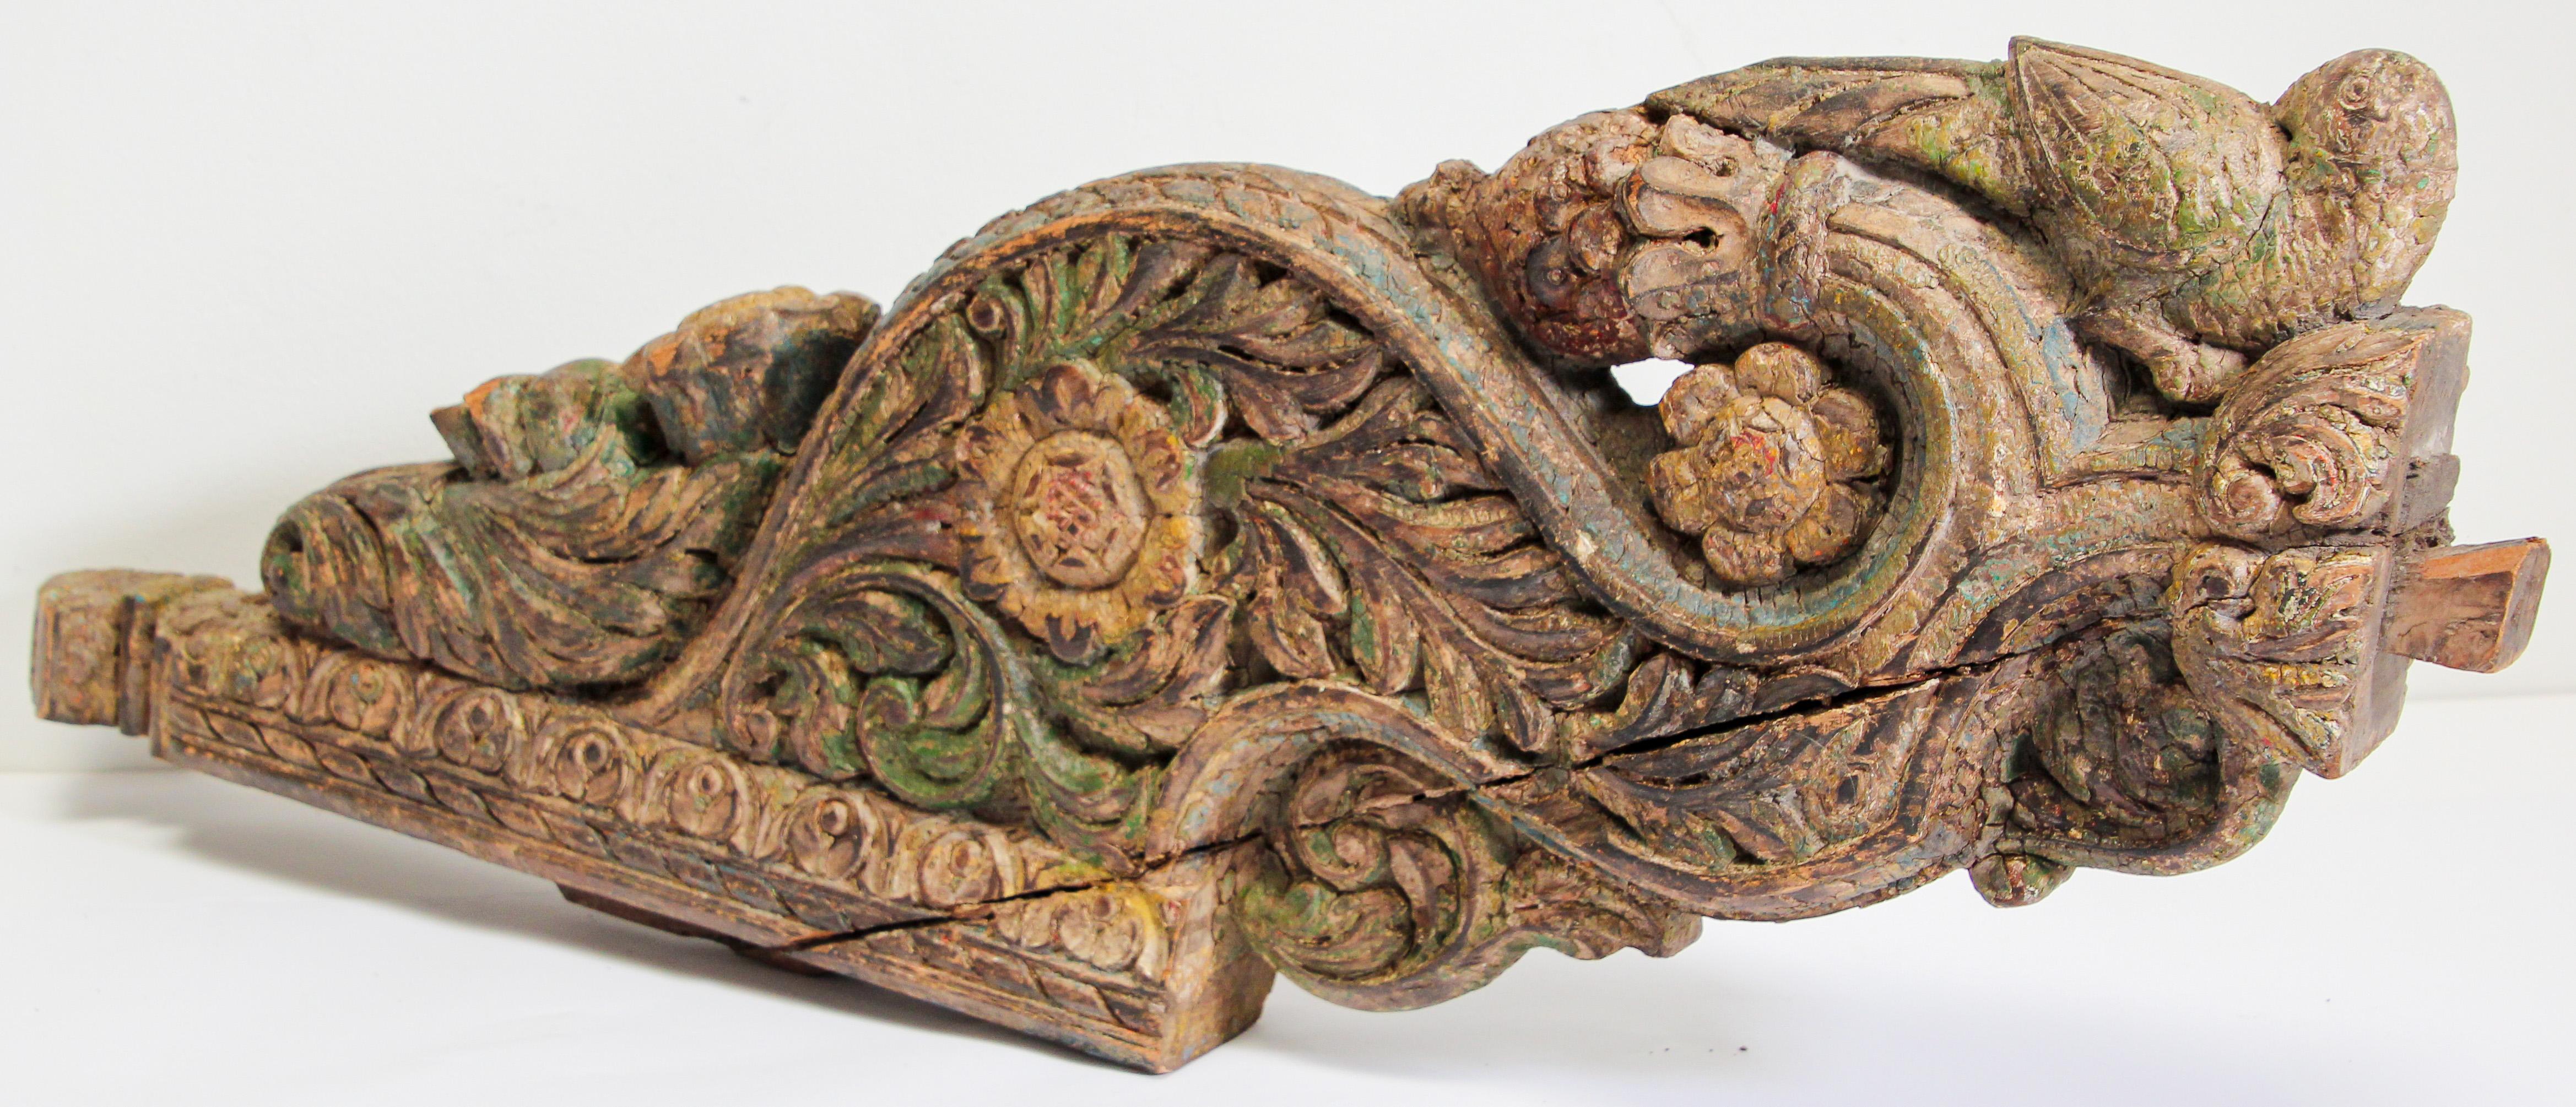 Antique architectural carved wood temple truss fragment from Rajasthan India.
Large and heavy wood hand carved fragment architectural temple fragment.
Depicting a bird, foliages and flower, used to be hand painted some green and blue colors still